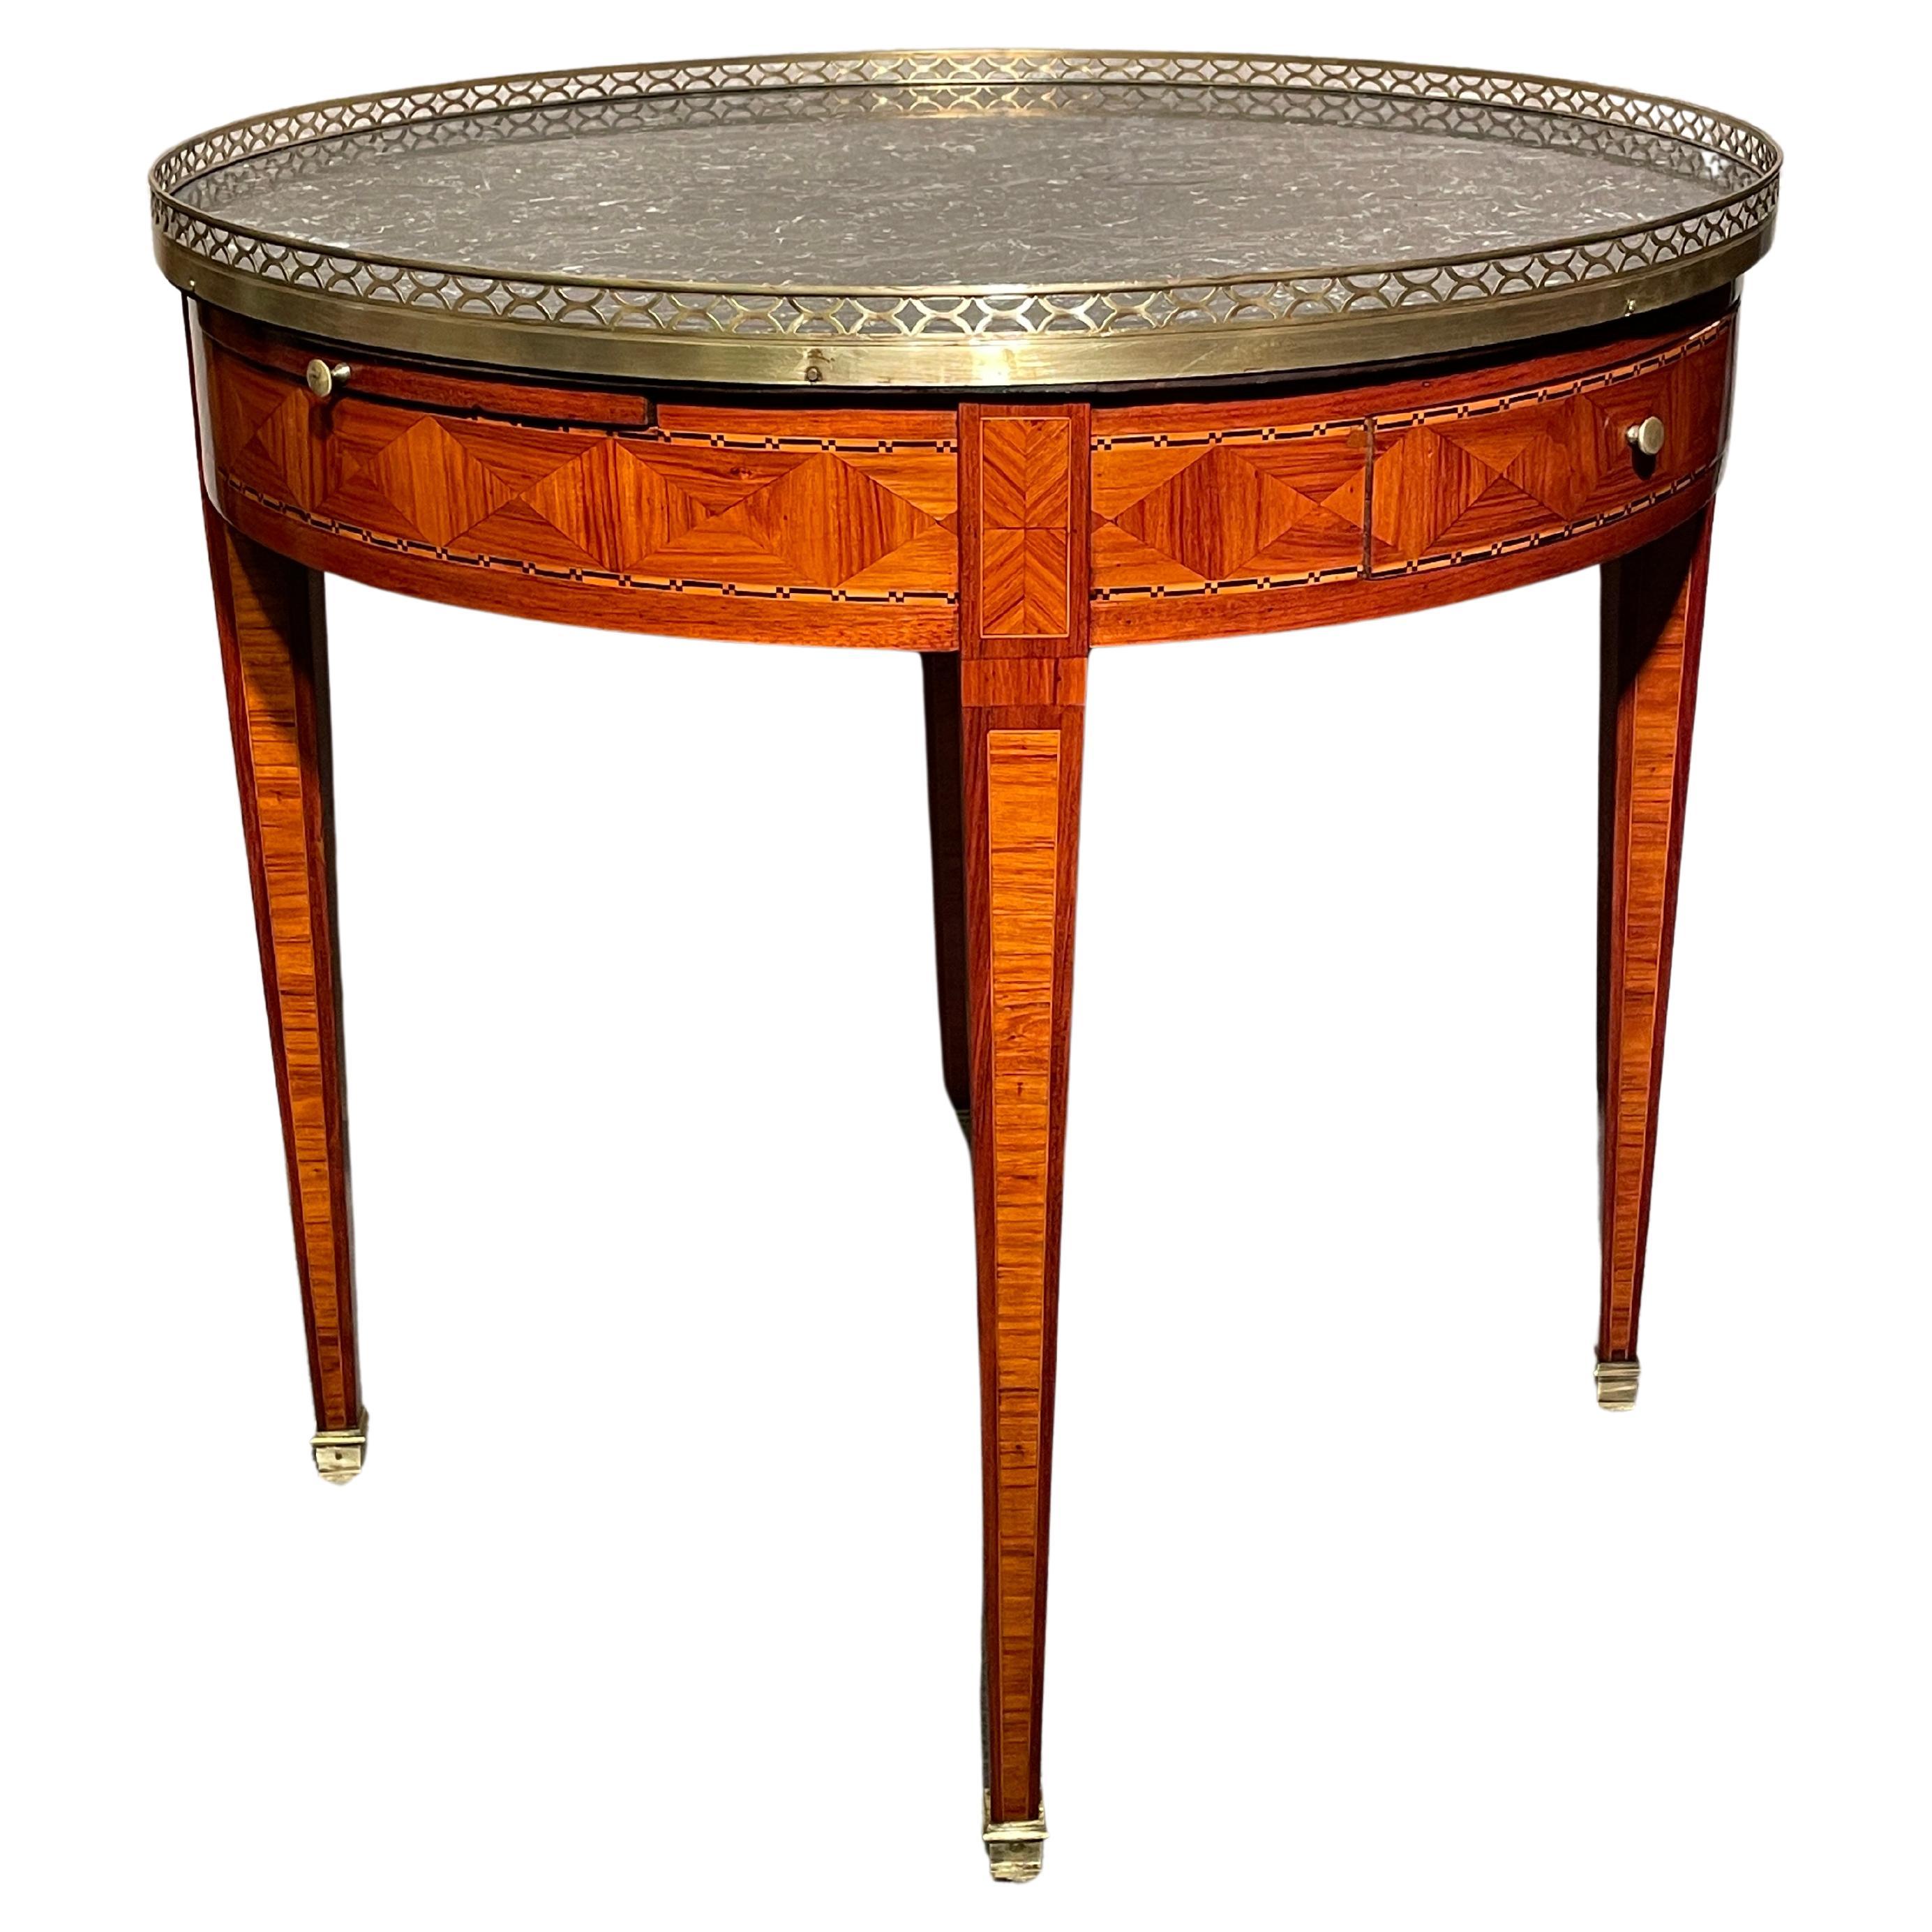 This exquisite Louis XVI Bouillotte Table, dating back to 1800, showcases the artistry of wood marquetry with inlaid bands. Adorned with a sophisticated dark grey marble top, elegantly framed by a delicate pierced brass gallery, this table is a true